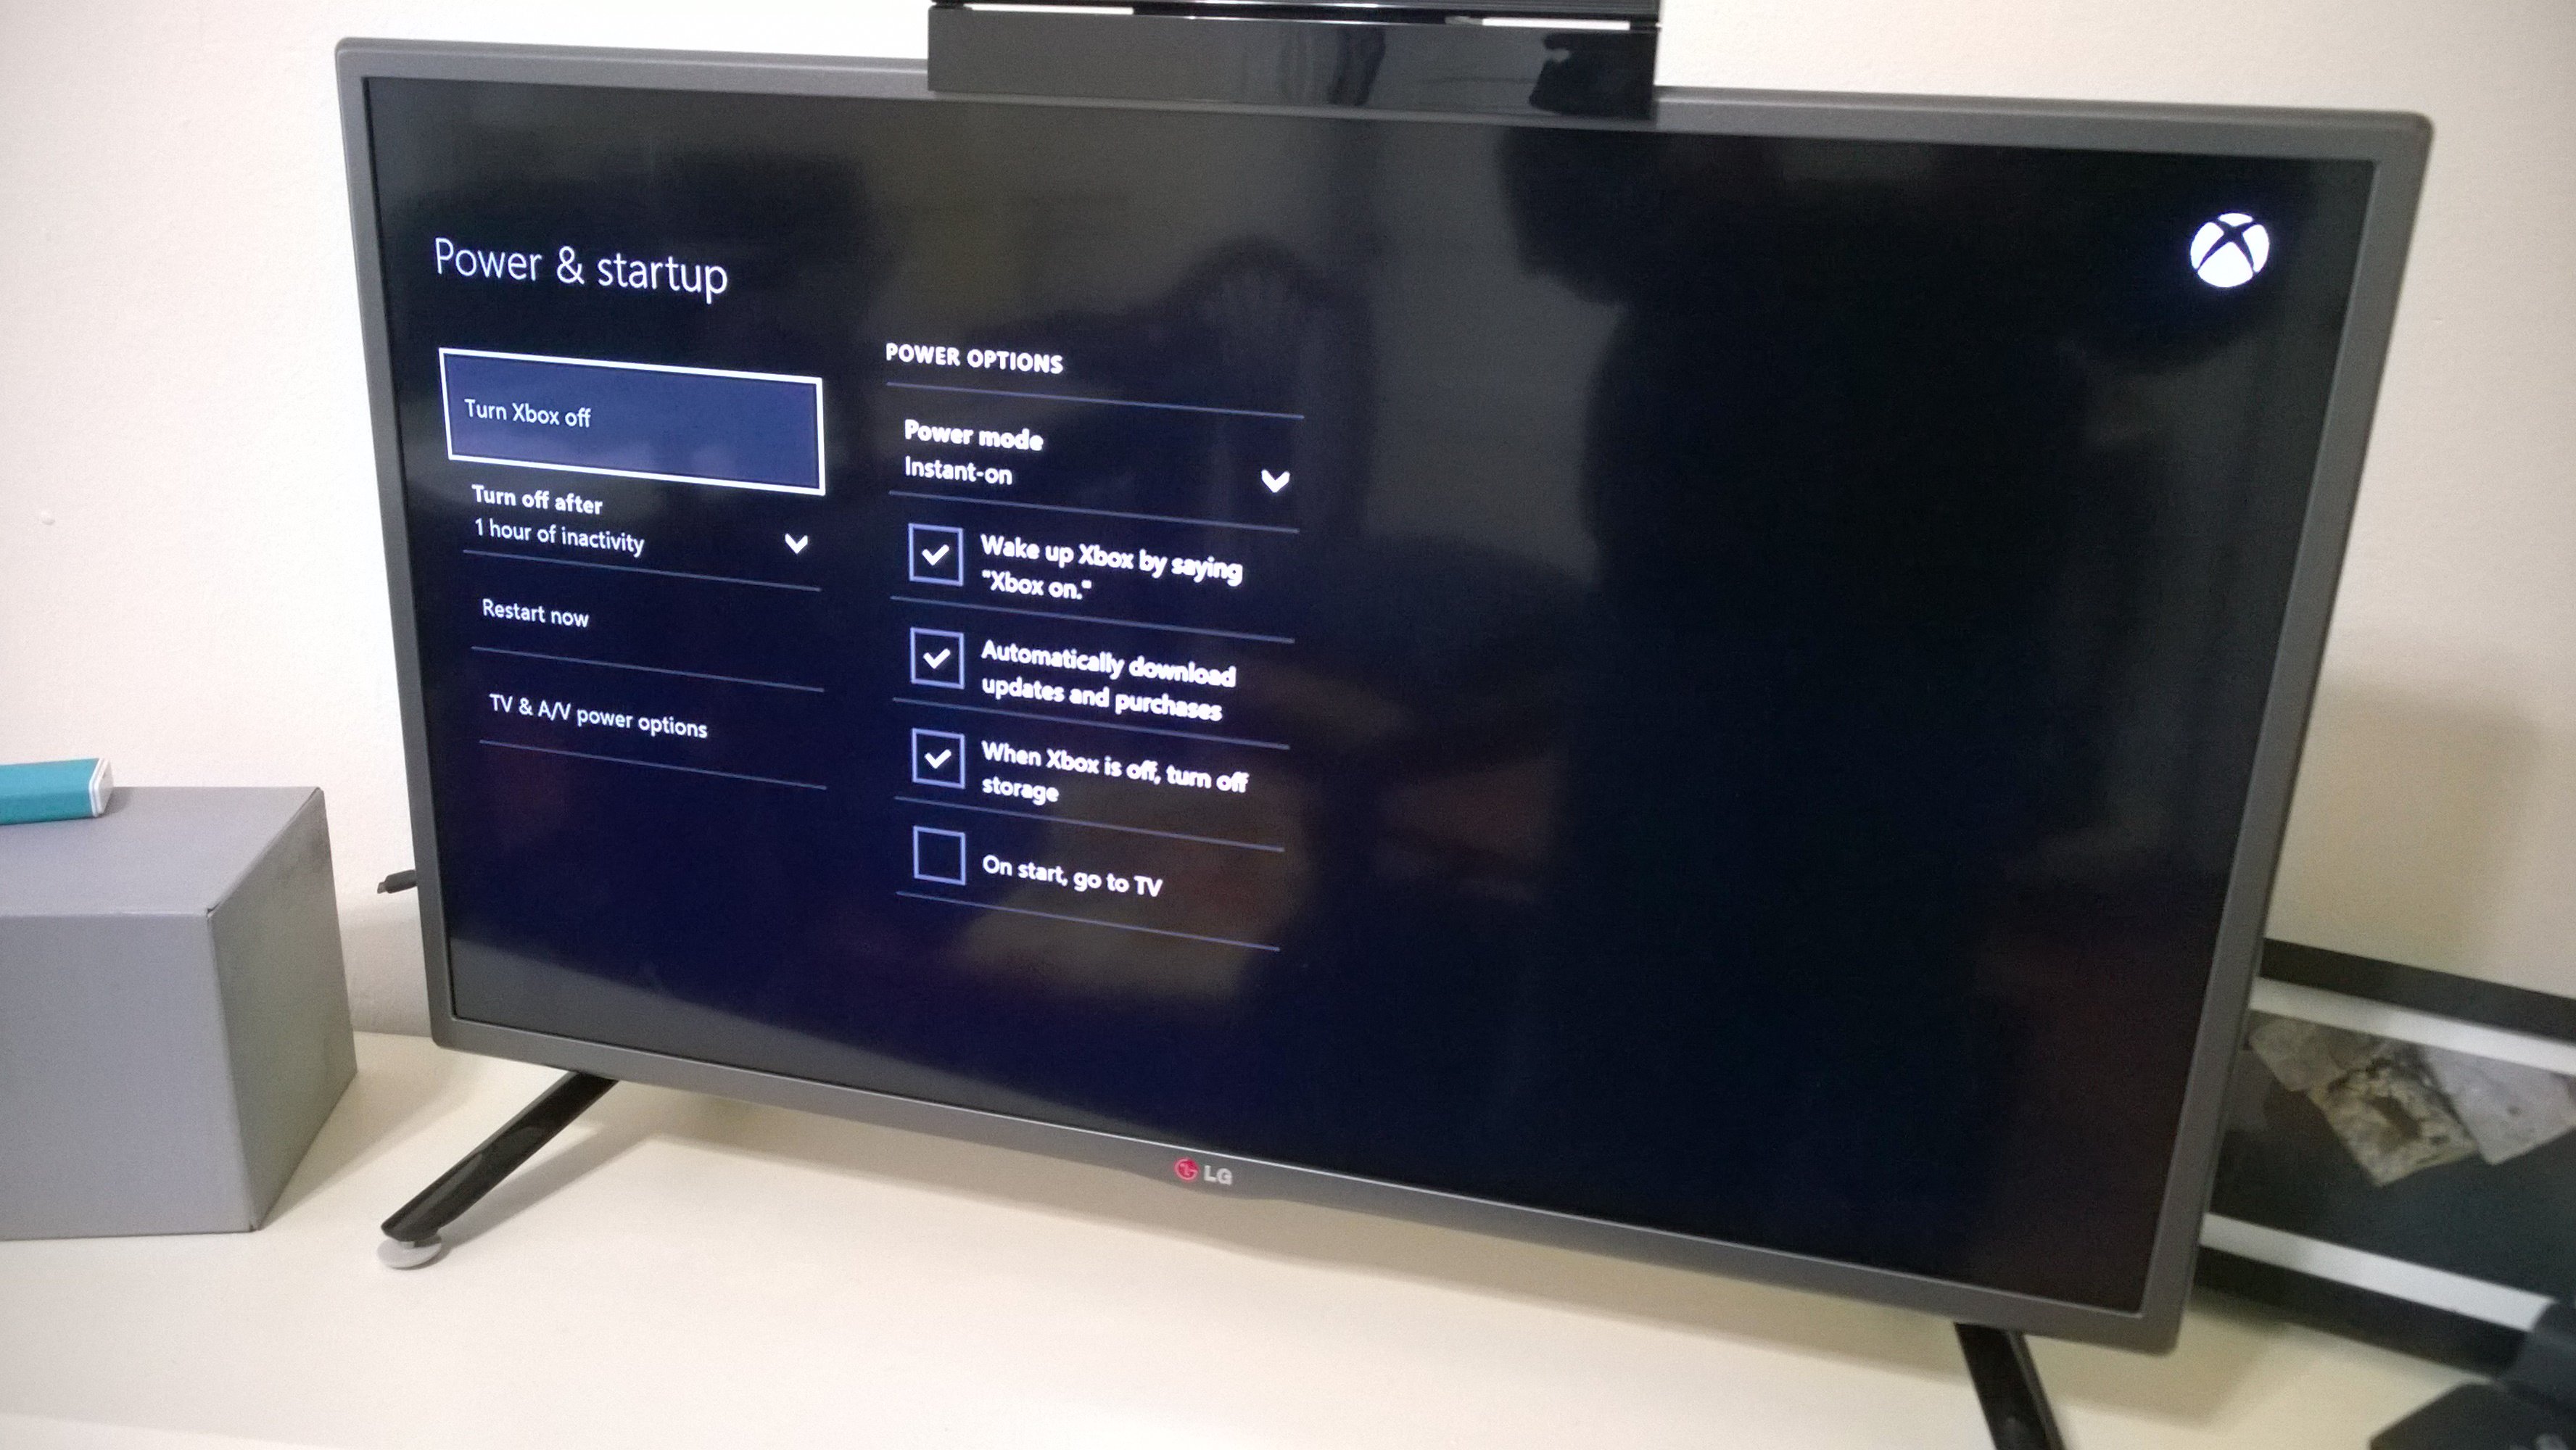 7 Settings To Change On Your Xbox One